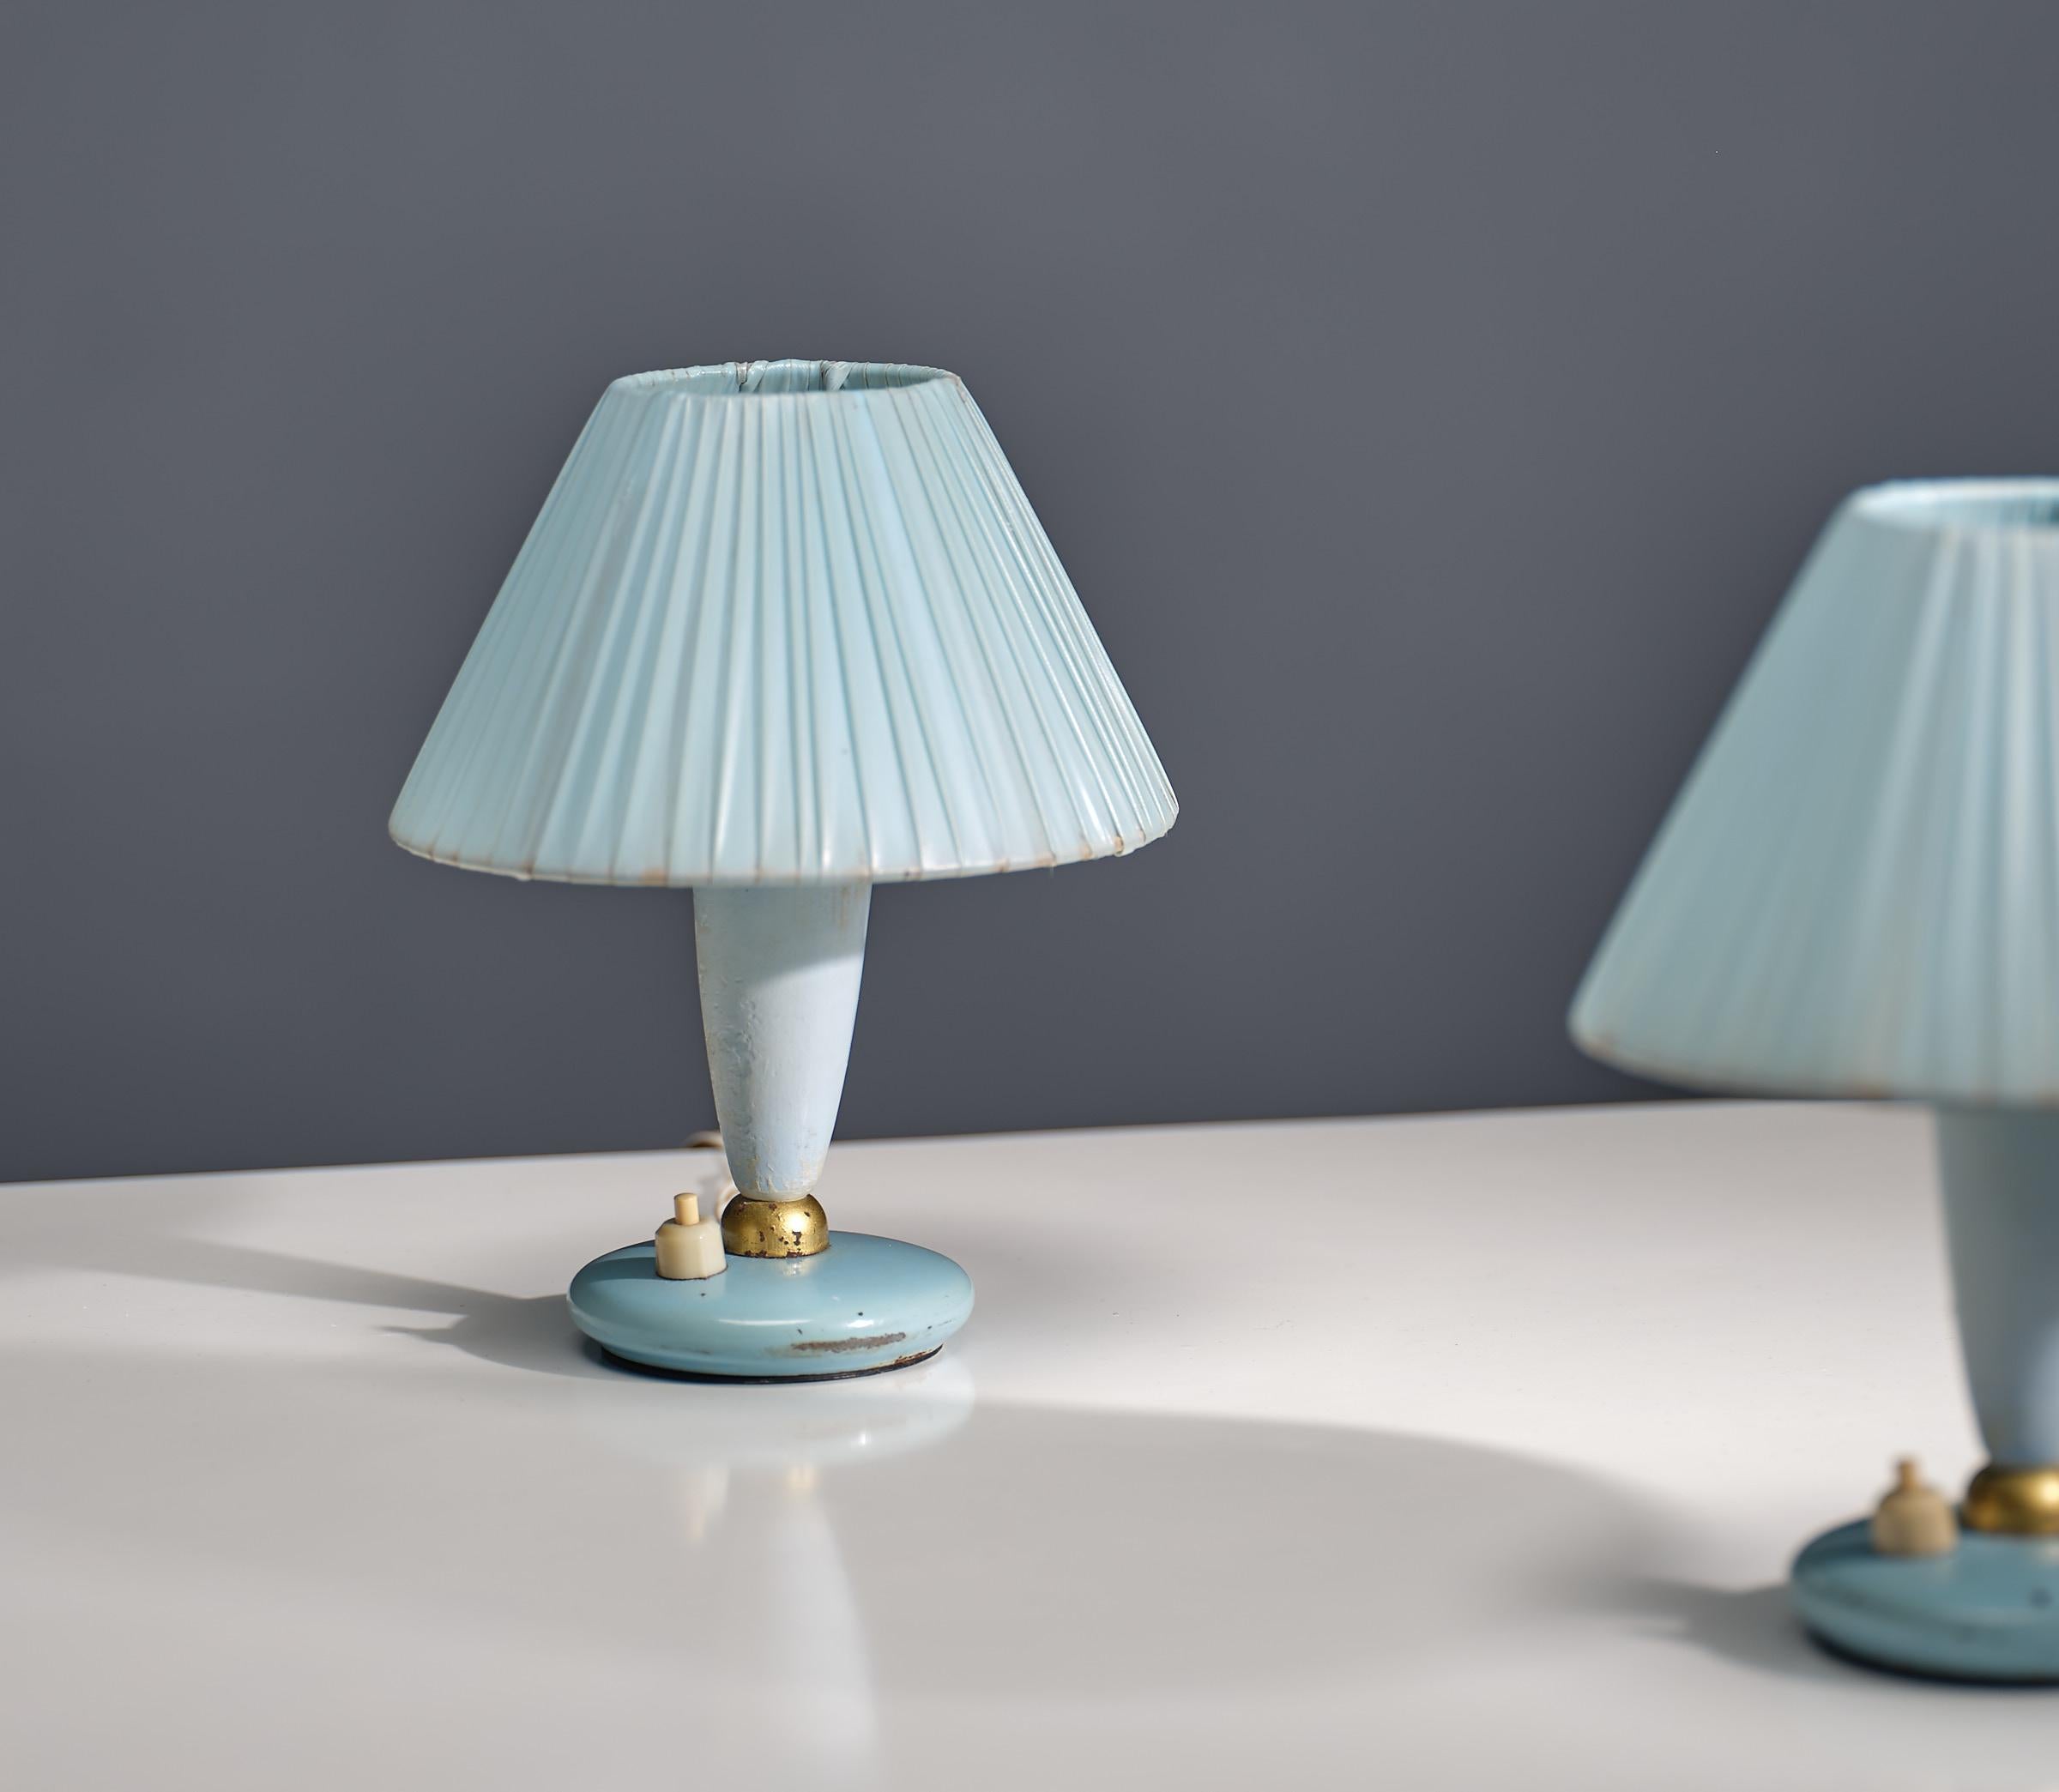 Pair of 1950s Italian Midcentury Modern Blue Bedside Lamps For Sale 2